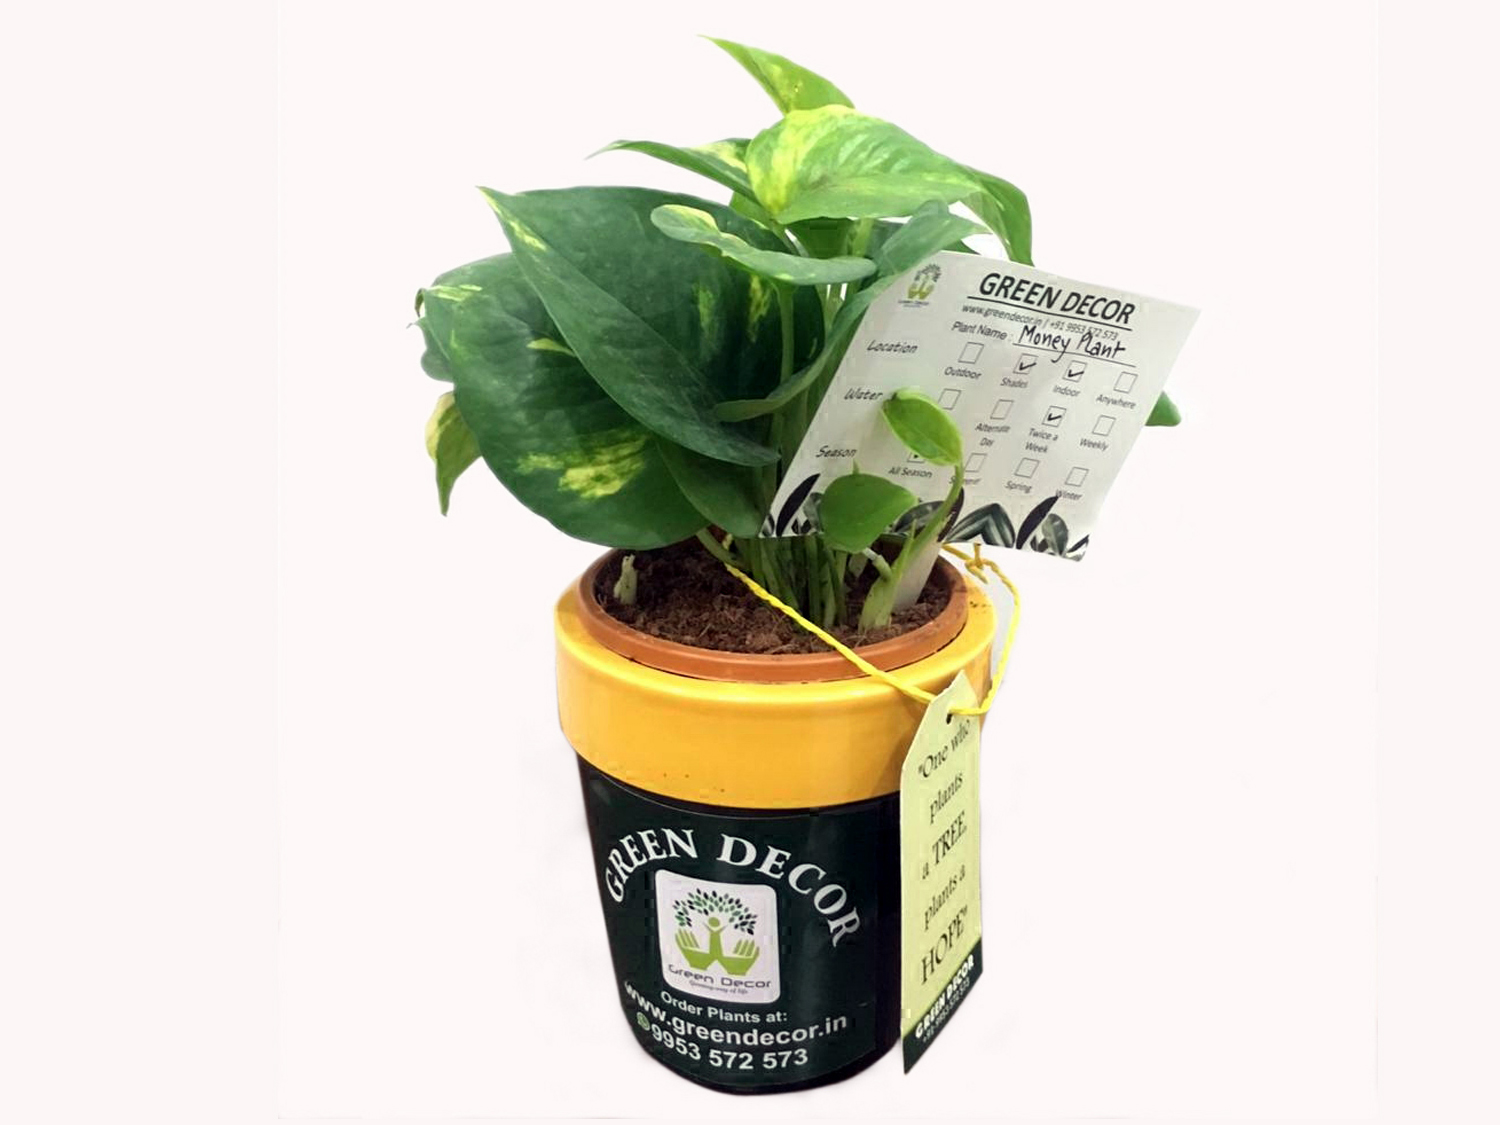 Money Plant with Ceramic Pots by Green Decor